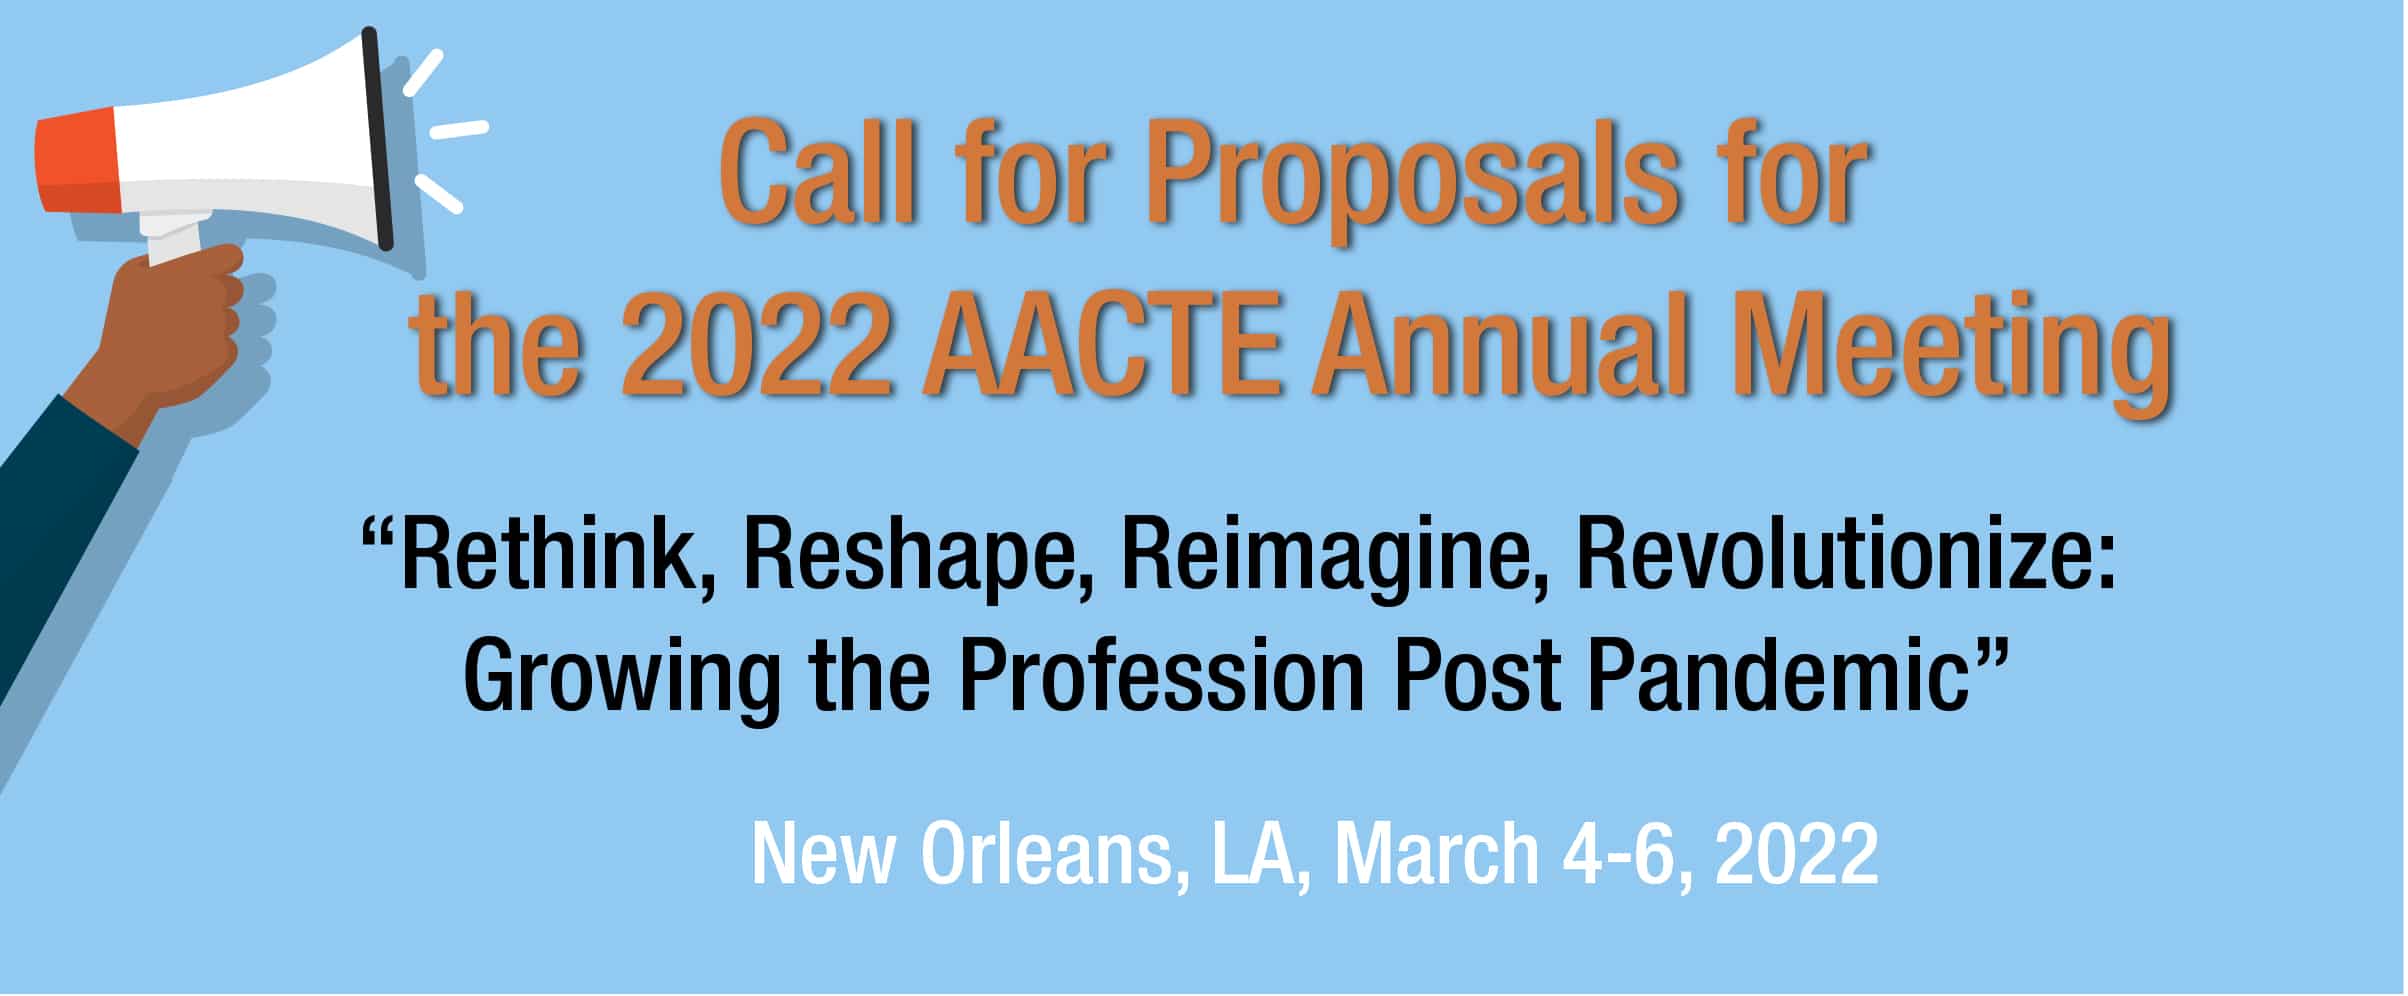 Call for Proposals - AACTE 2022 Annual Meeting